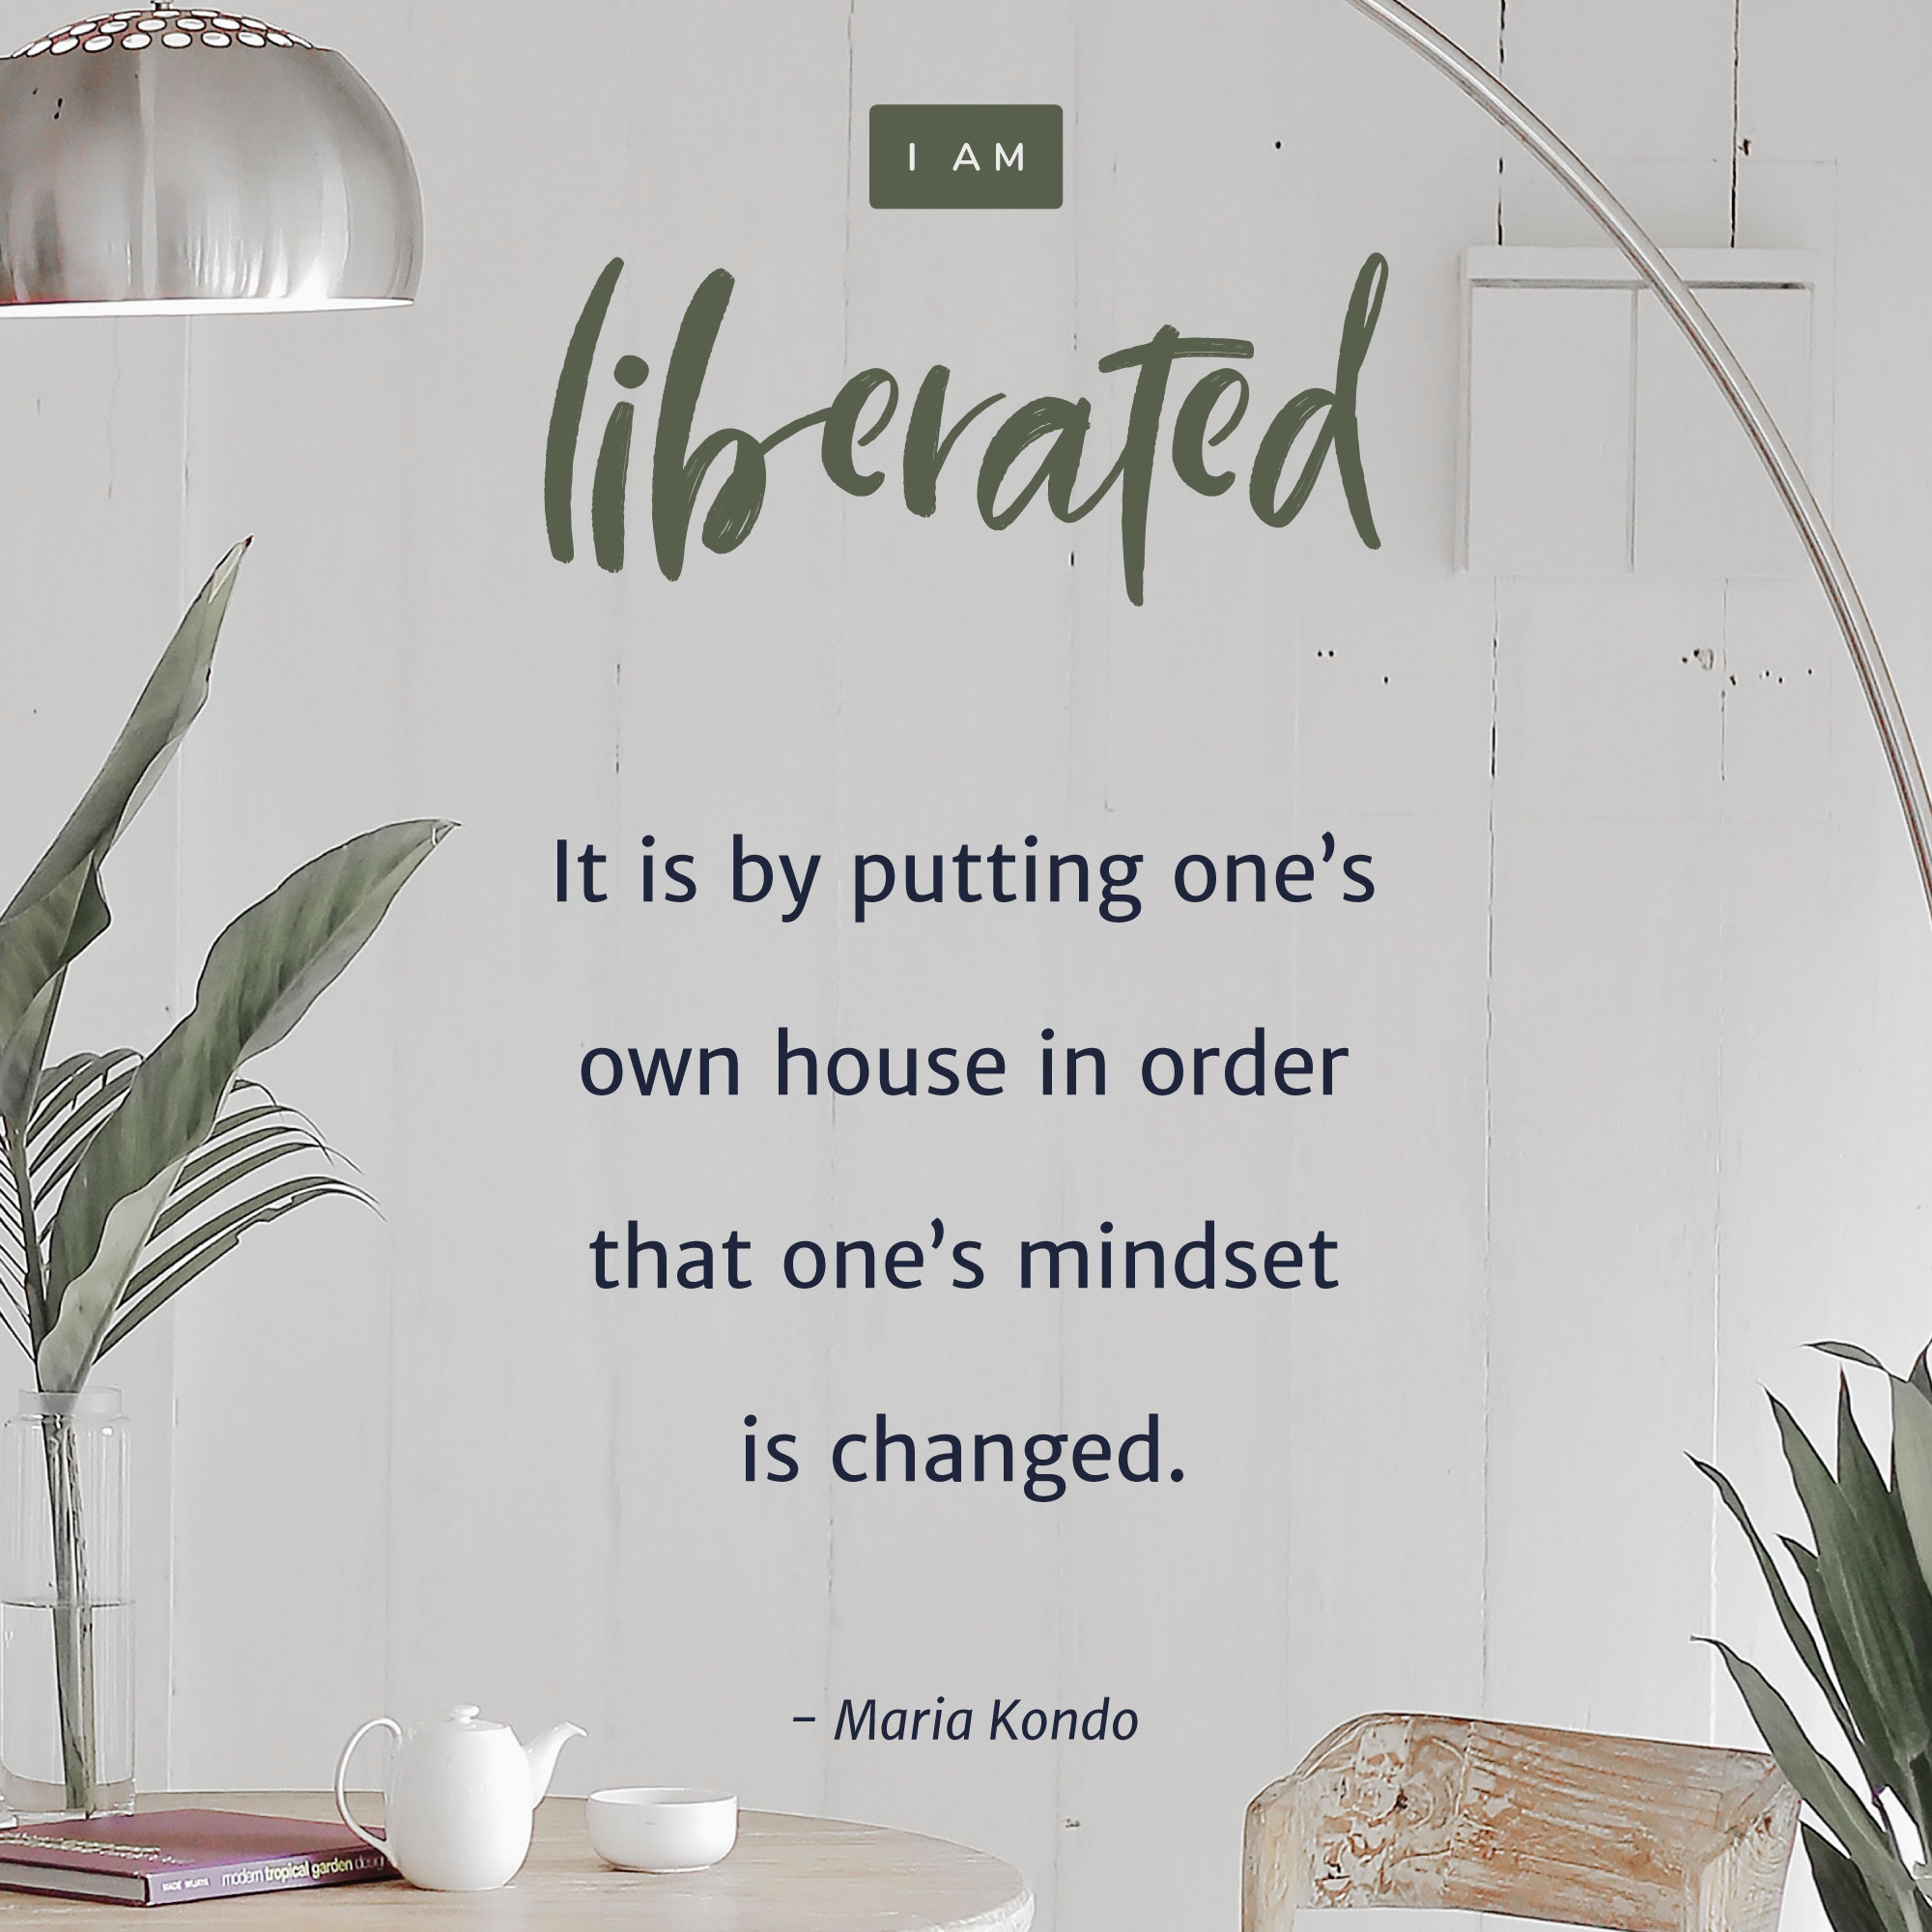 “It is by putting one’s own house in order that one’s mindset is changed.” - Maria Kondo